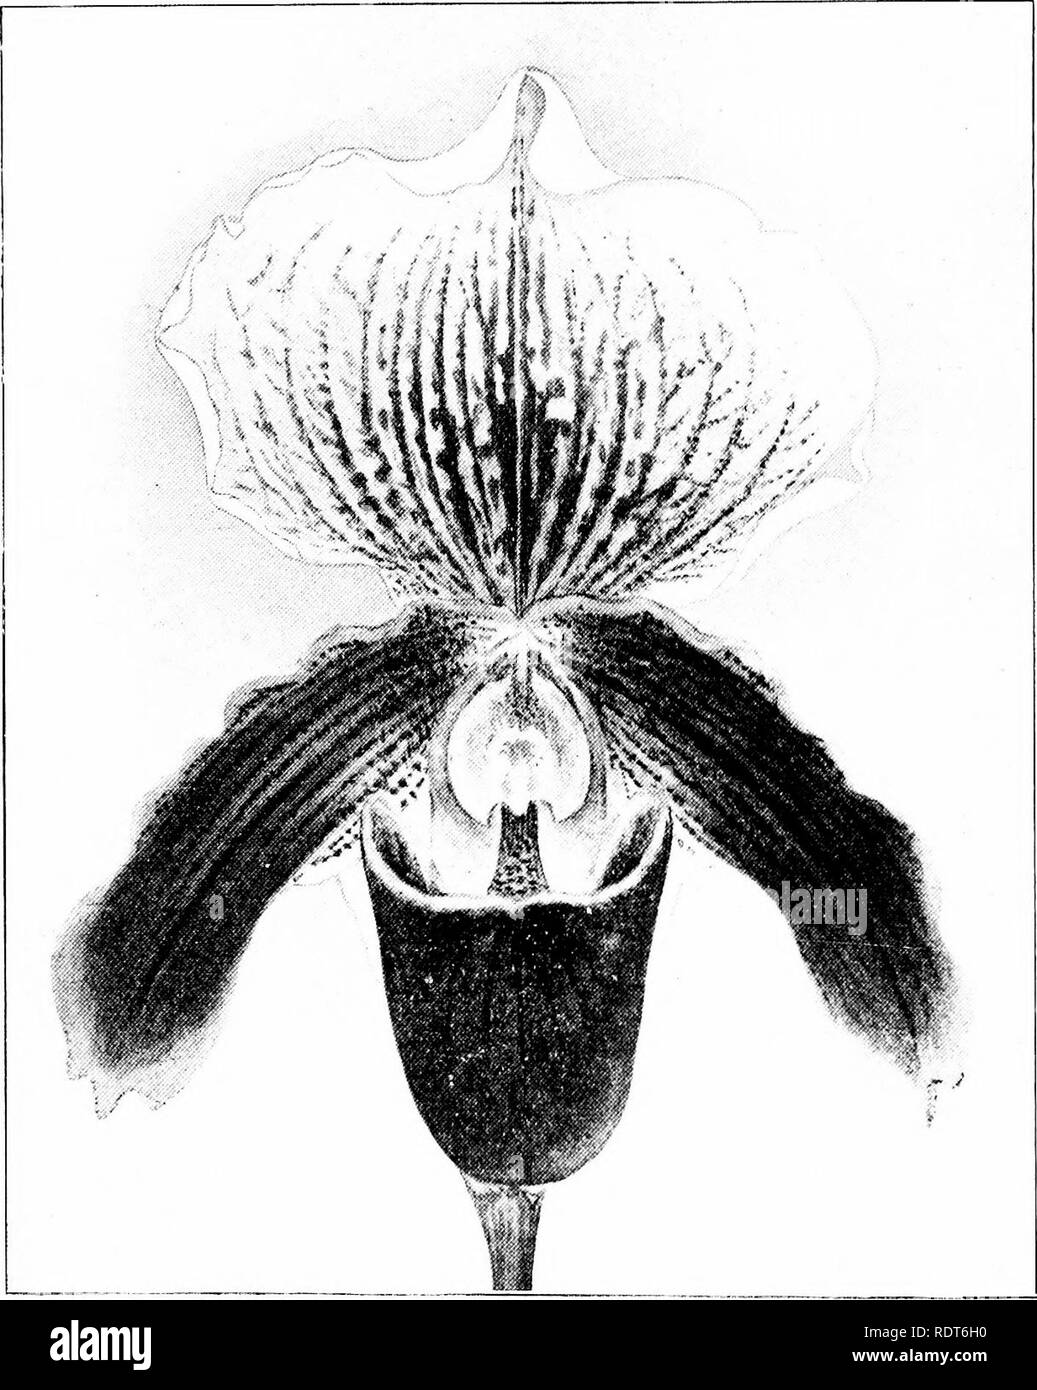 . The orchid stud-book: an enumeration of hybrid orchids of artificial origin, with their parents, raisers, date of first flowering, references to descriptions and figures, and synonymy. With an historical introduction and 120 figures and a chapter on hybridising and raising orchids from seed. Orchids. 184 THE ORCHID STUD-BOOK. [Part II. C. x Milo, G.C. 1894, ii. 70; O.R. 1895, 30; J.H. 1899, ii. 503, f. 89 (Westonbirt var.) ; G.C. 1899, ii. 413, f. 131 (id.). 398. P. X miniatum (Curtisii ? x insigne).—Sander, 1895. C. x miniatum, Gard. 1895, i. 50; G.C. 1895, i. 199; O.R. 1896, 38; 1900, 351. Stock Photo